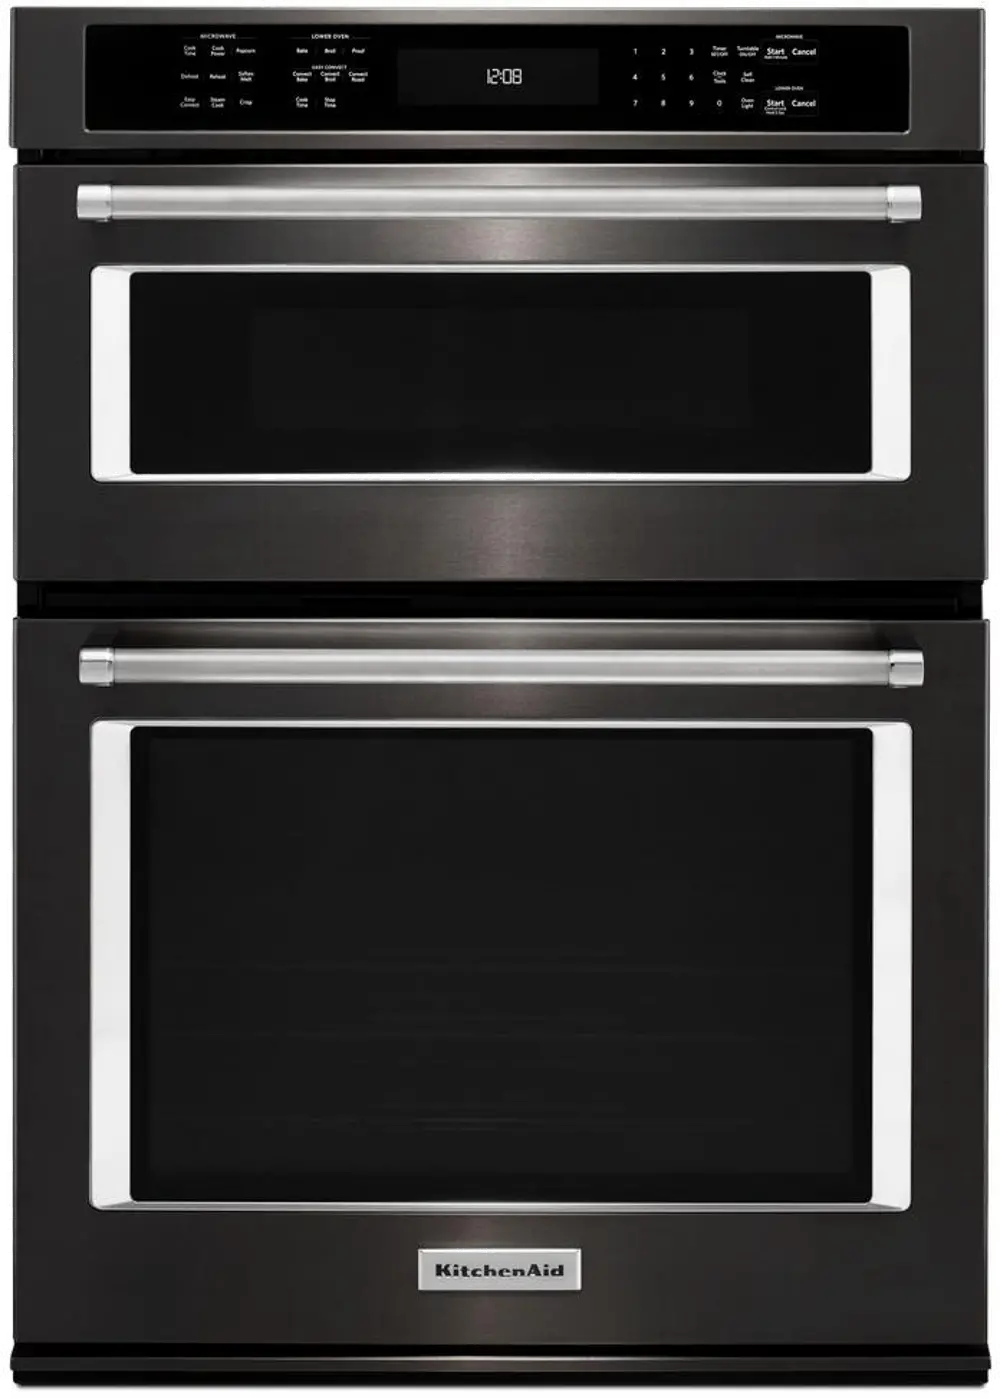 KOCE500EBS KitchenAid 6.4 cu ft Combination Wall Oven - Black Stainless Steel 30 Inch-1